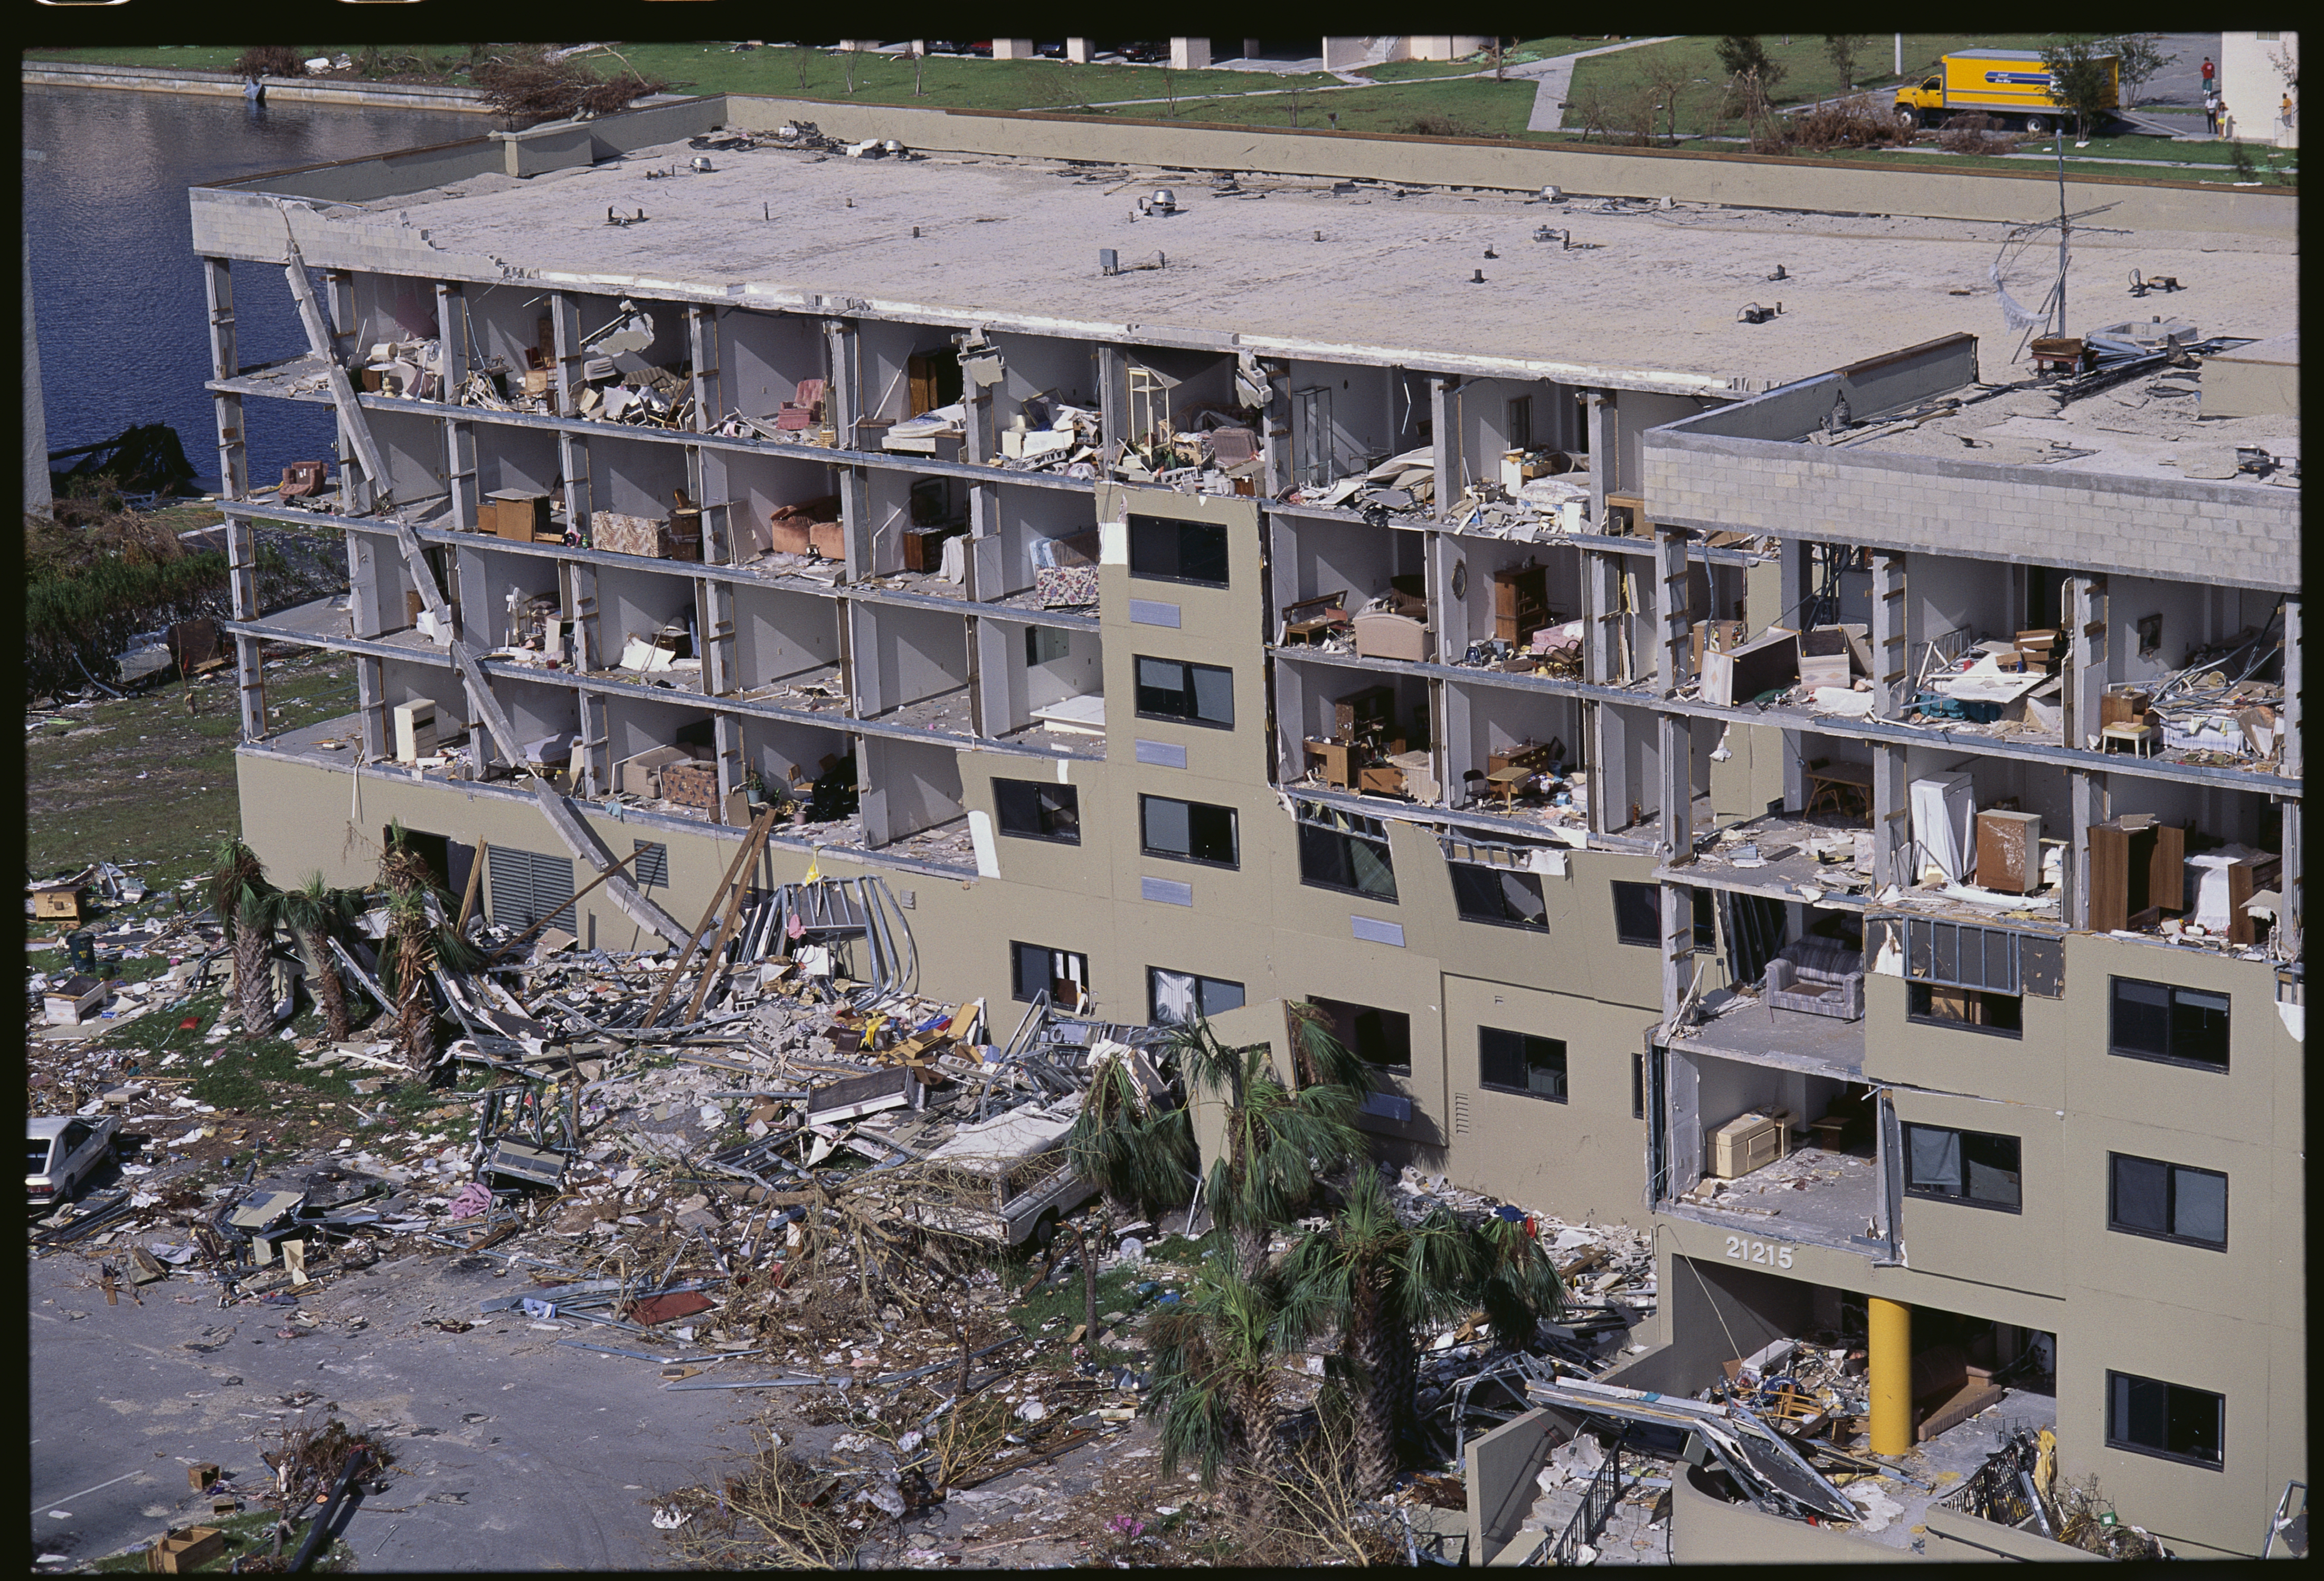 A condo damaged by Hurricane Andrew in 1992